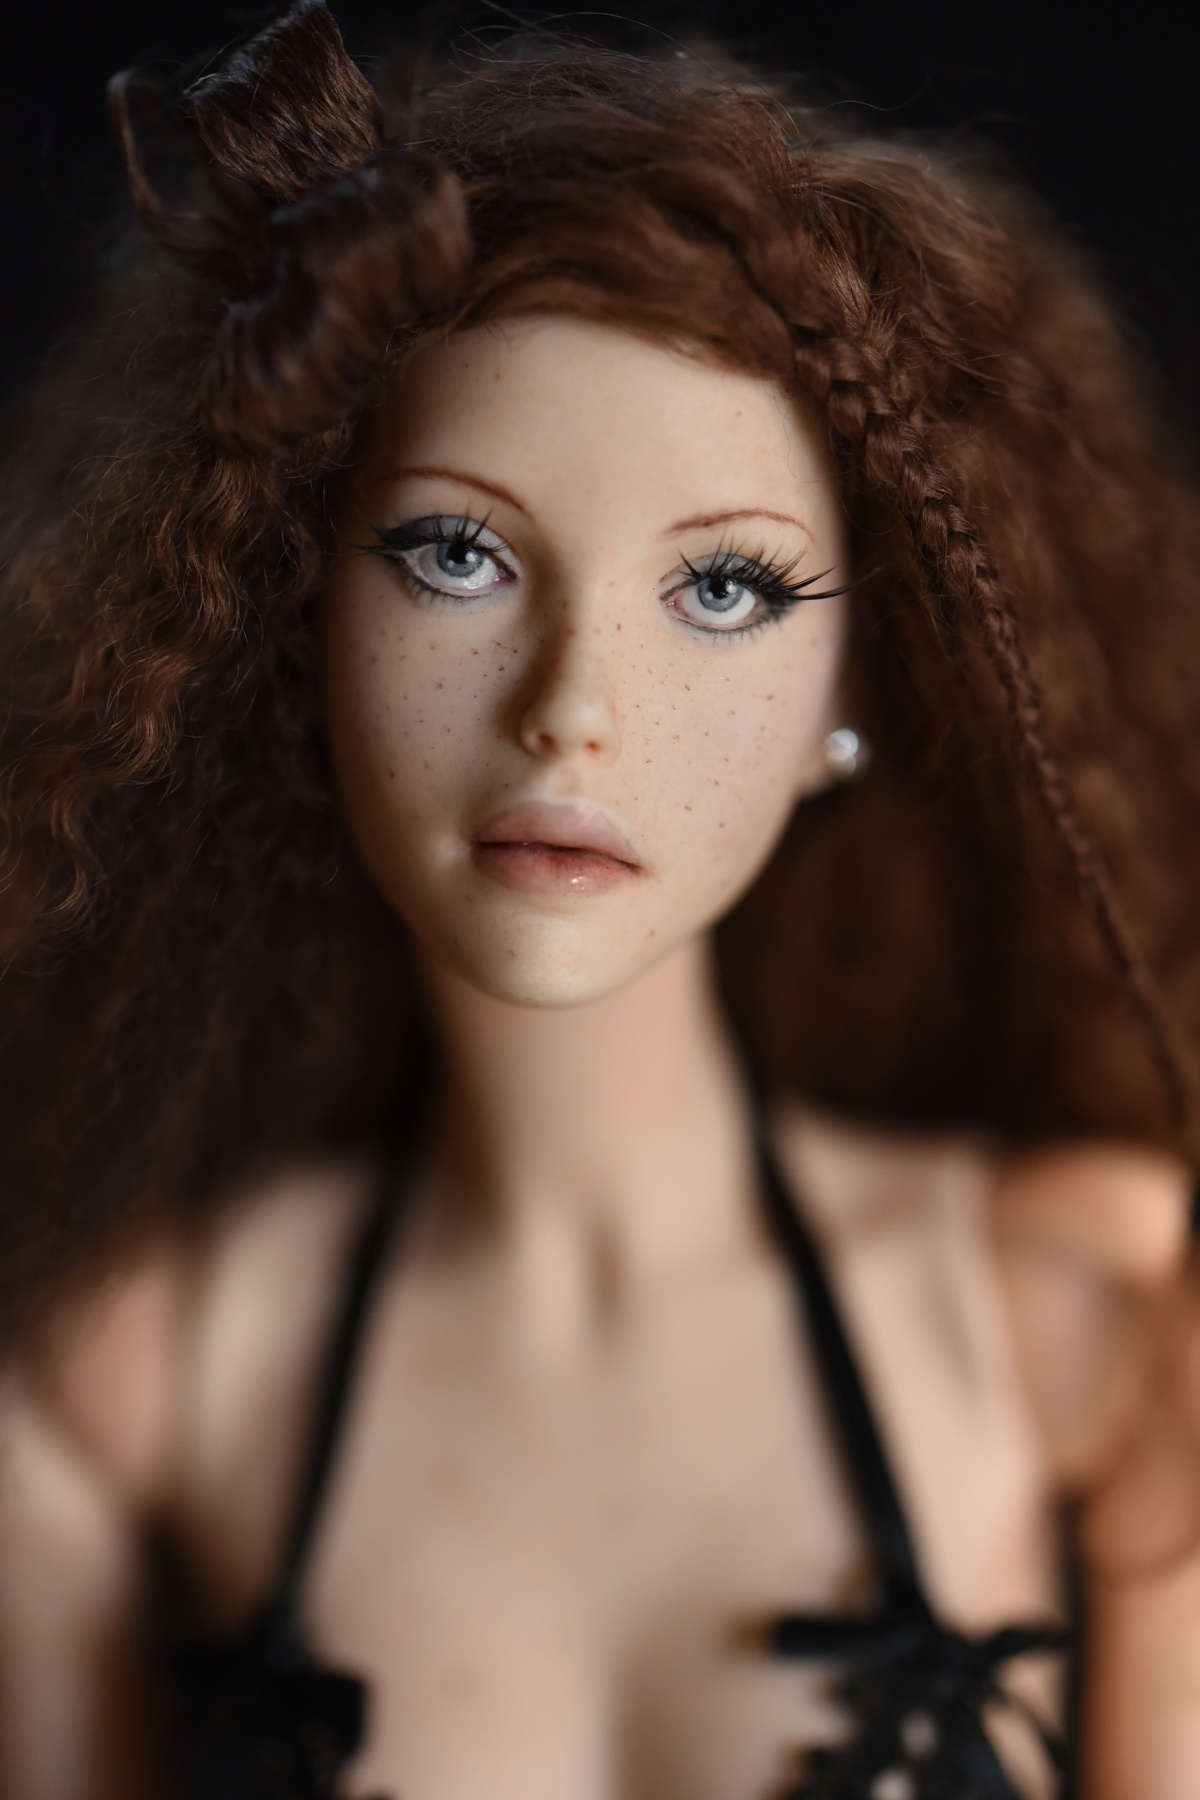 Ball Jointed Doll Amity